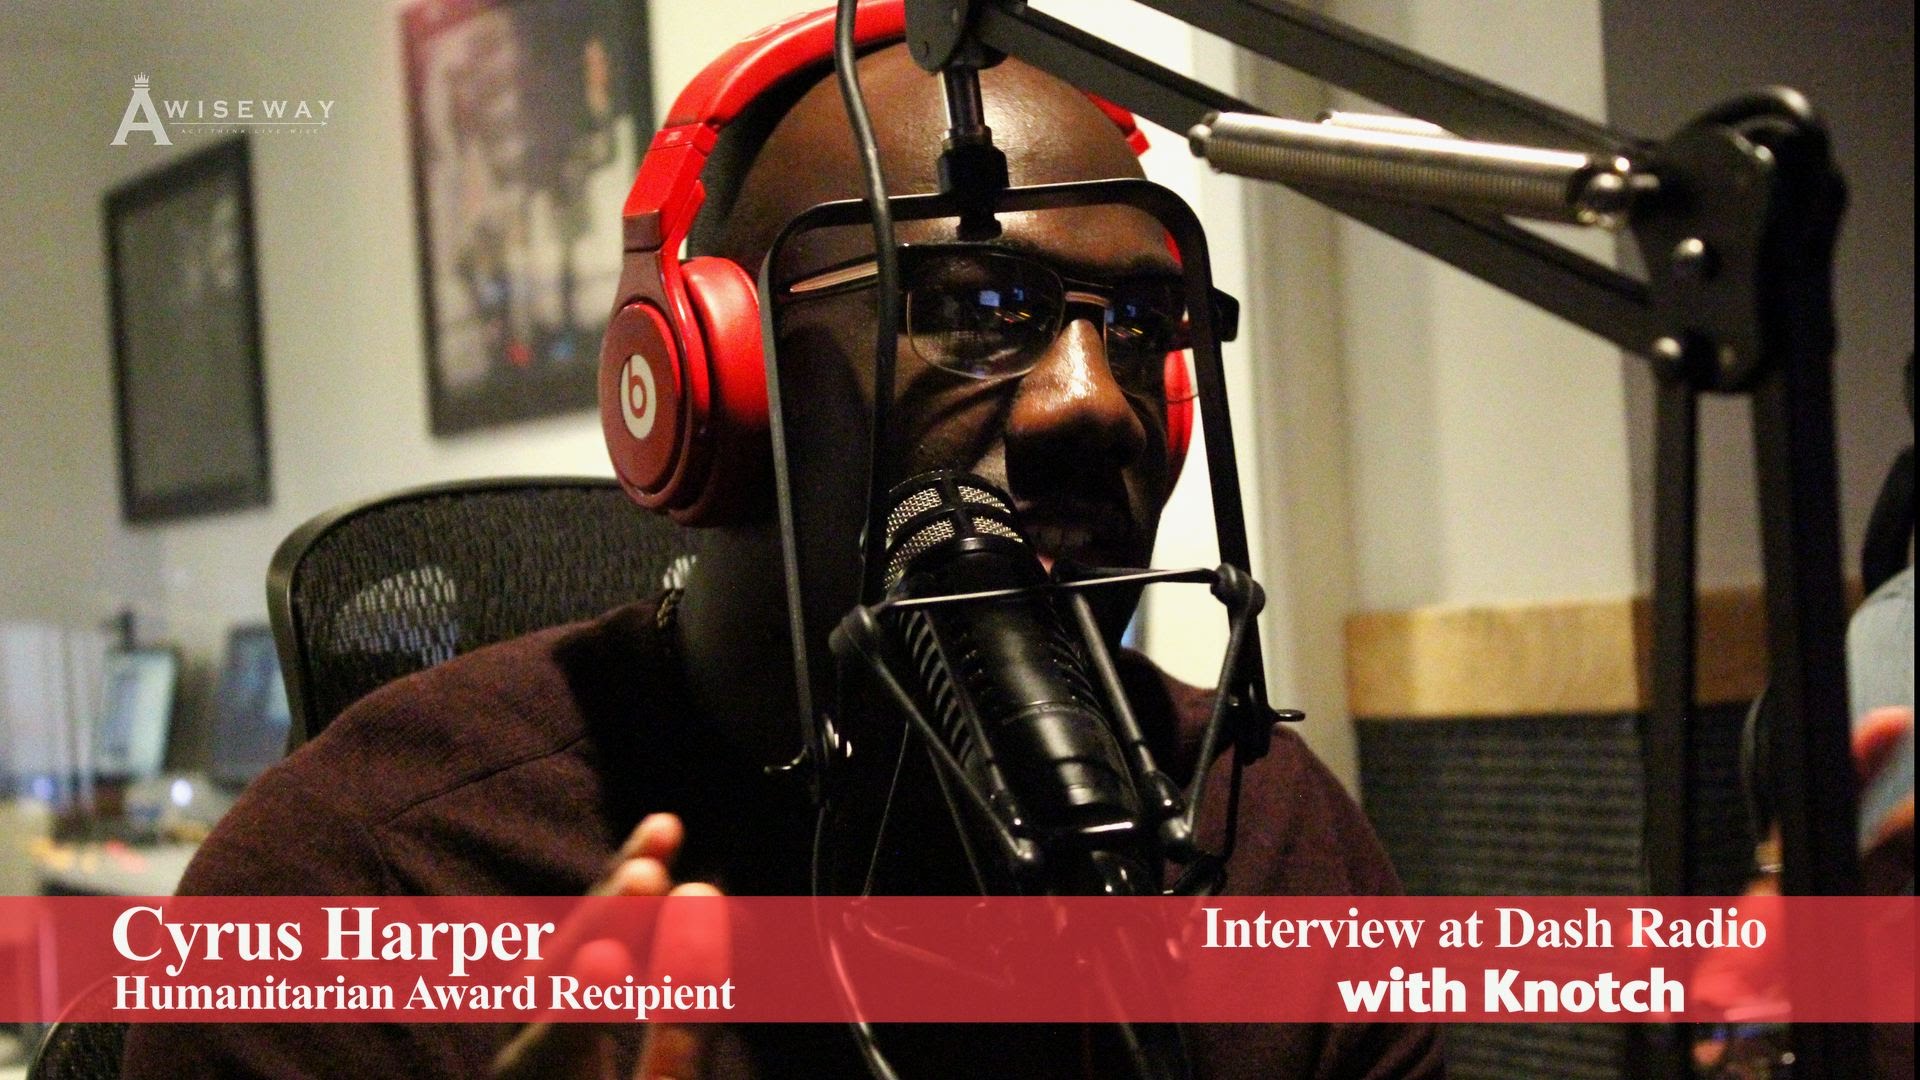 Cyrus Harper Promotes a Righteous Thought Process and Discusses The Many Realities of Today